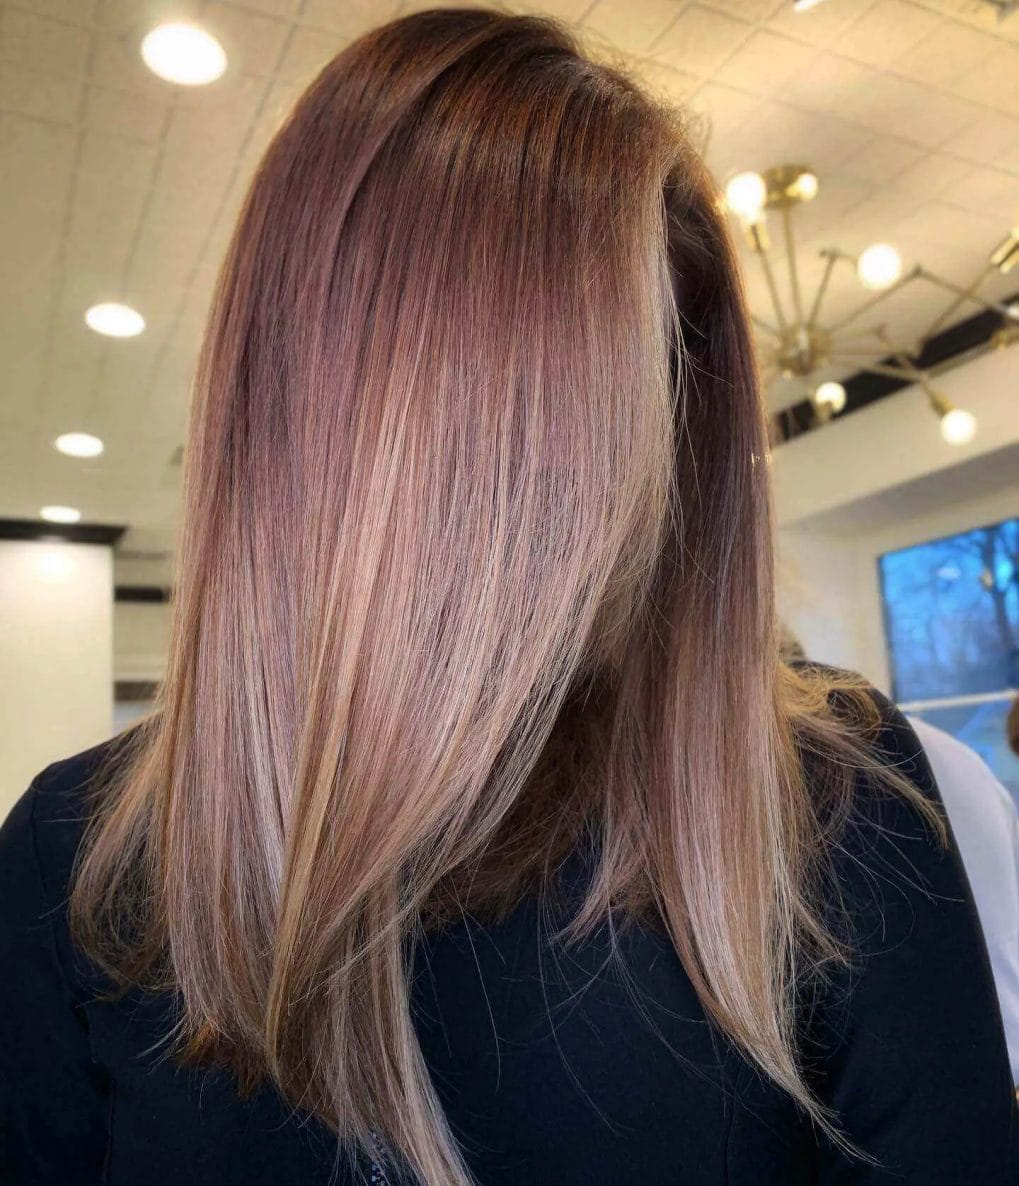 Mid-length straight hair with rose gold balayage and subtle layers.